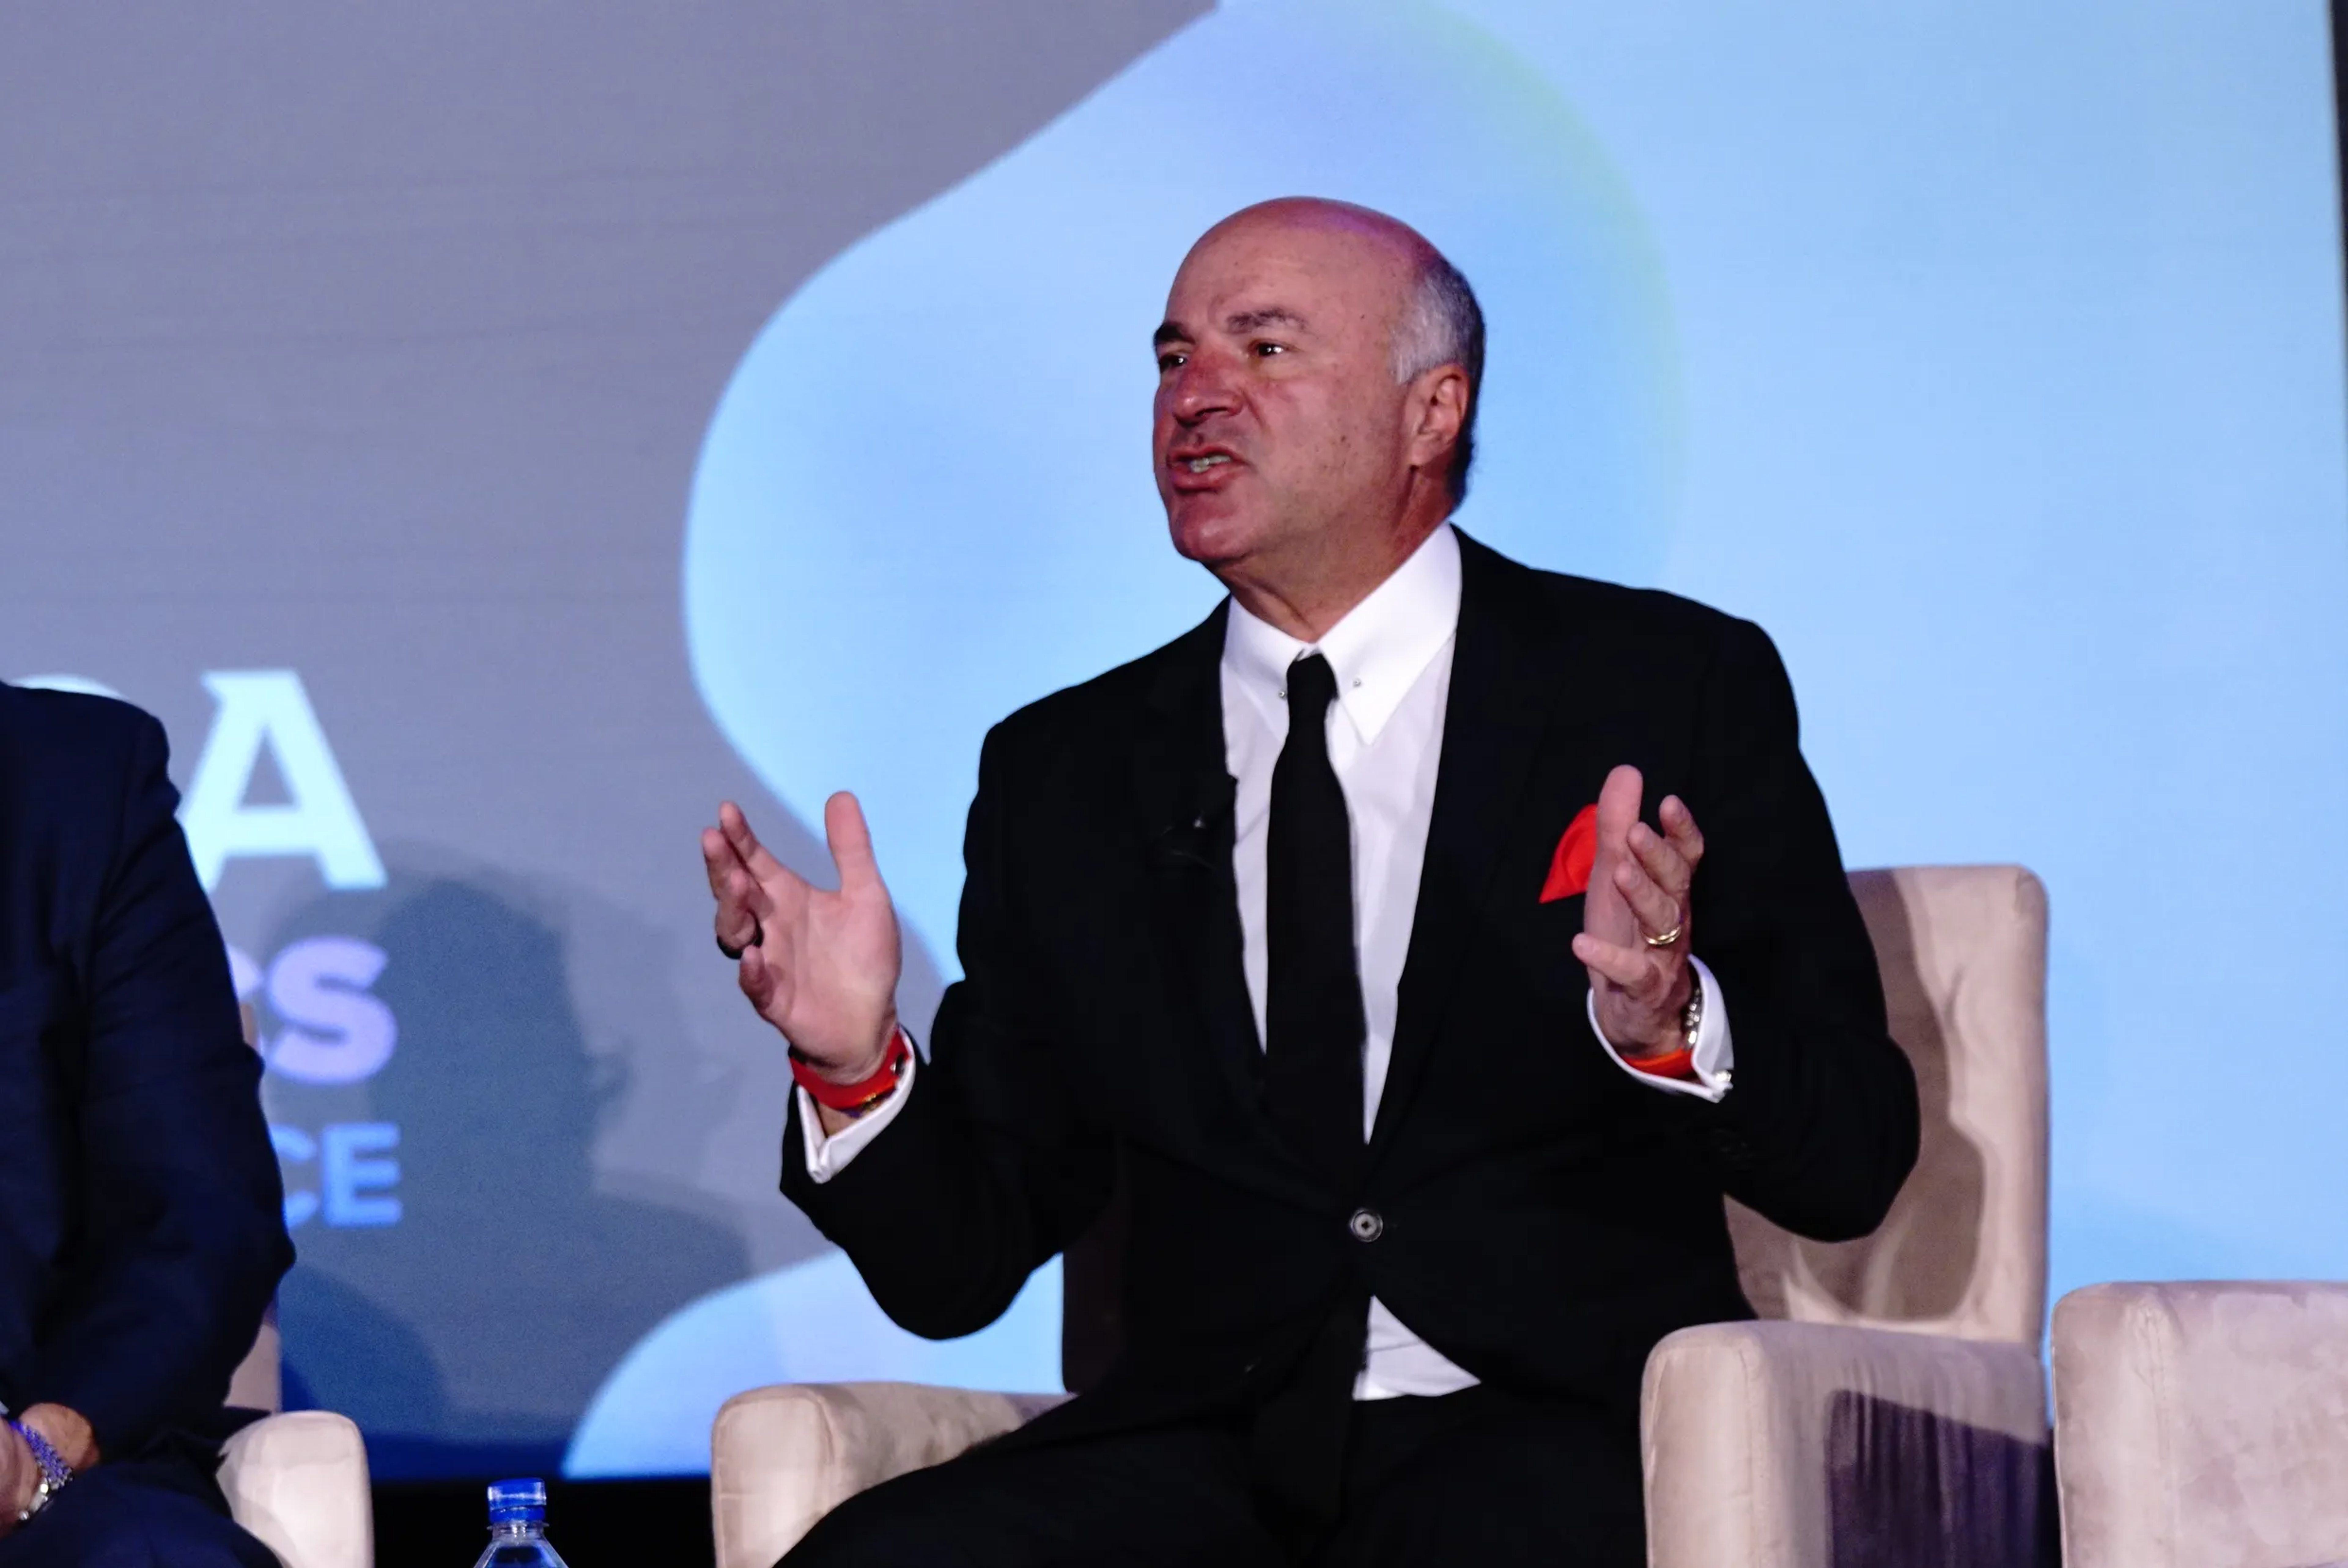 EXCLUSIVE: Kevin O&#39;Leary Says &#39;Idiots&#39; Are Holding Crypto Back, But Regulation Can Bolster Bitcoin Value